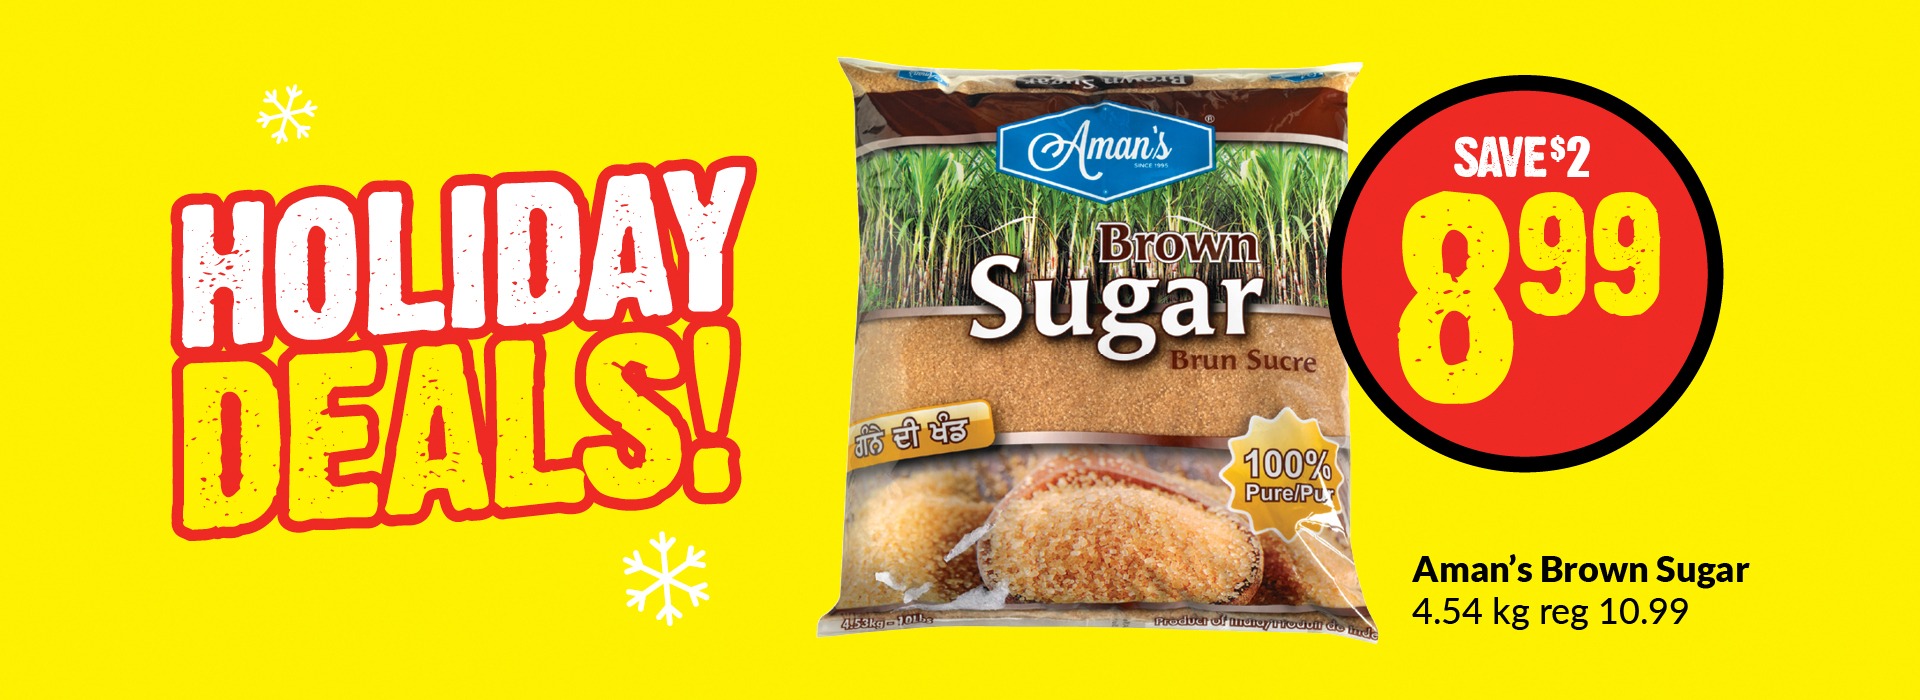 The image consists of a pack of Aman's Brown Sugar 4.54 kg reg 10.99, with text written on it, "Holiday Deals, Save $8.99".